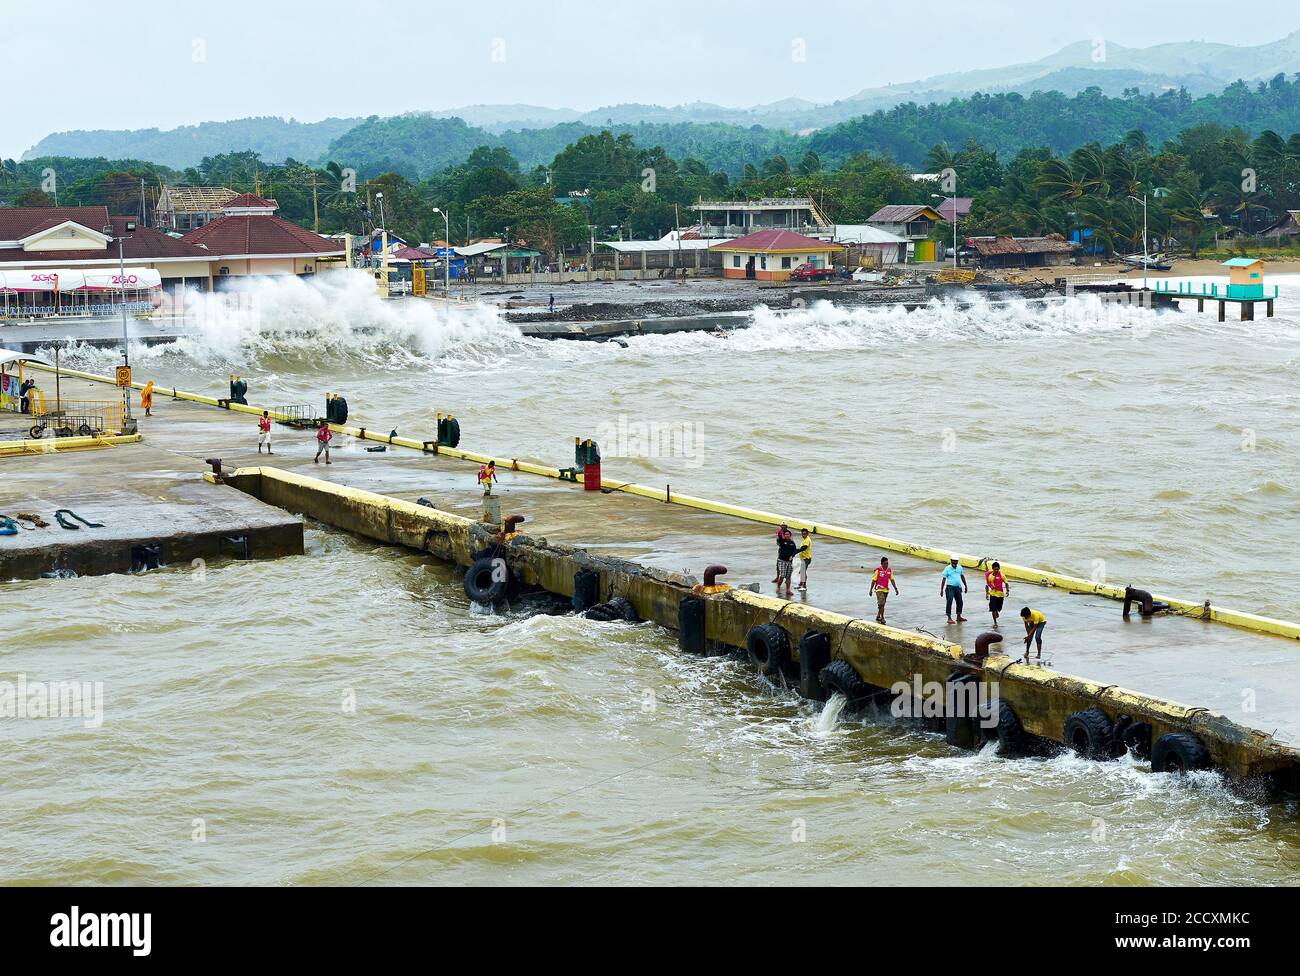 Caticlan pier, Aklan, Philippines: Very rough sea with big waves at the gateway to Boracay Island. Porters preparing for docking. Stock Photo